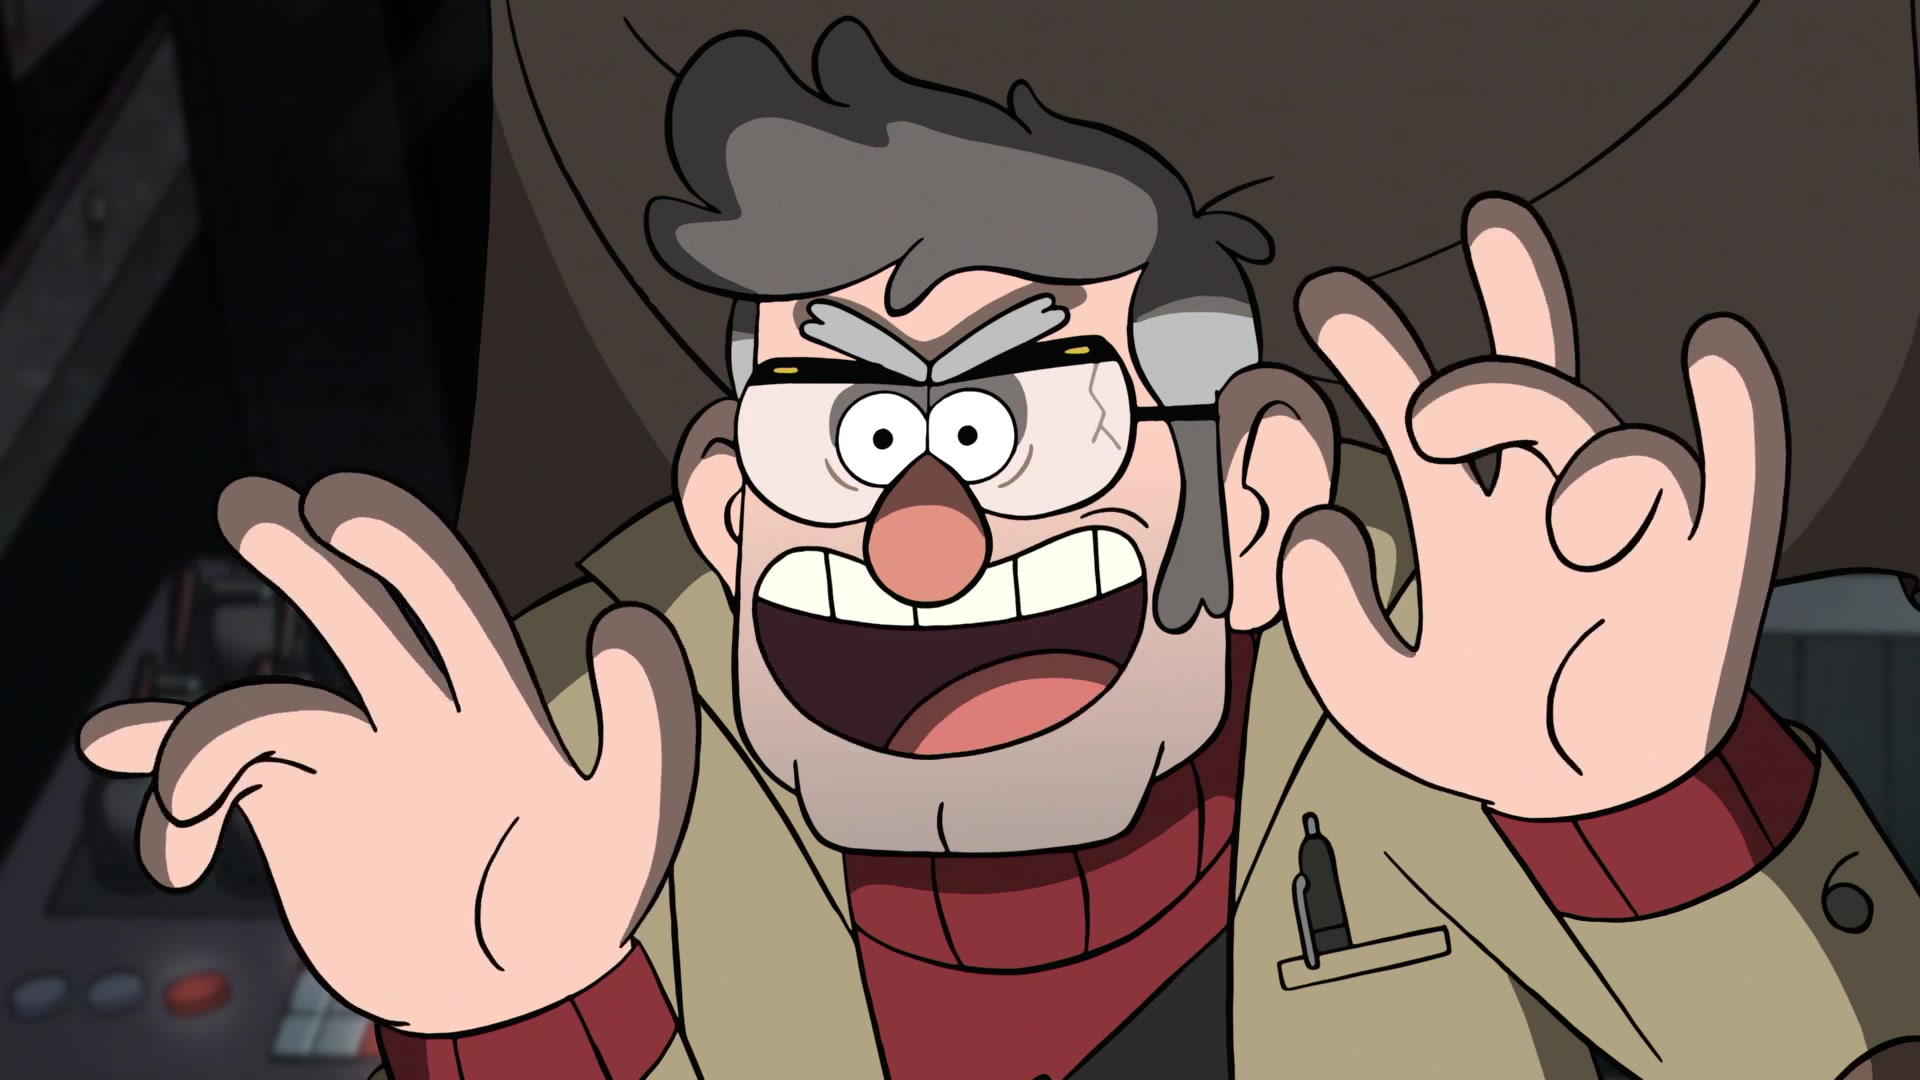 Image S2e13 Ford It S A Trap Gravity Falls Wiki Fandom Powered By Wikia